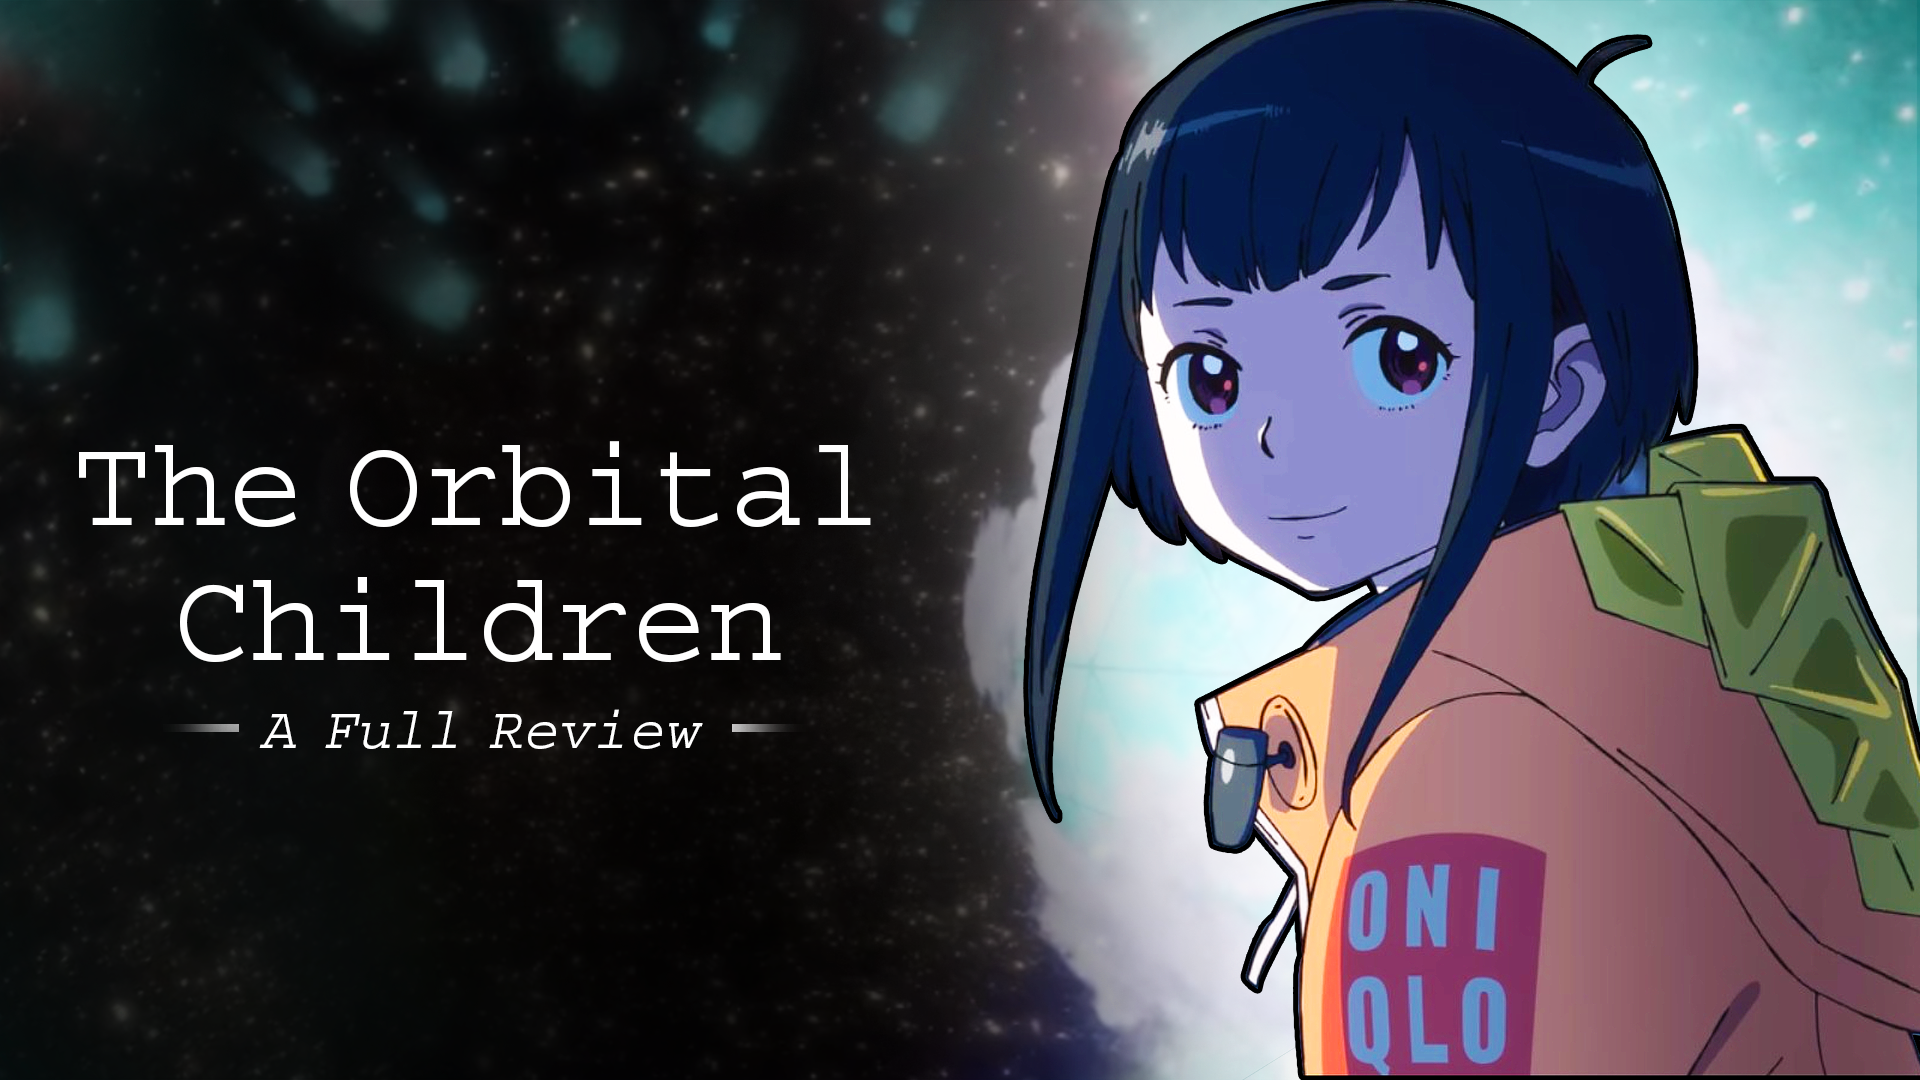 The Orbital Children All Episodes - Watch all episodes free complete with English subtitles